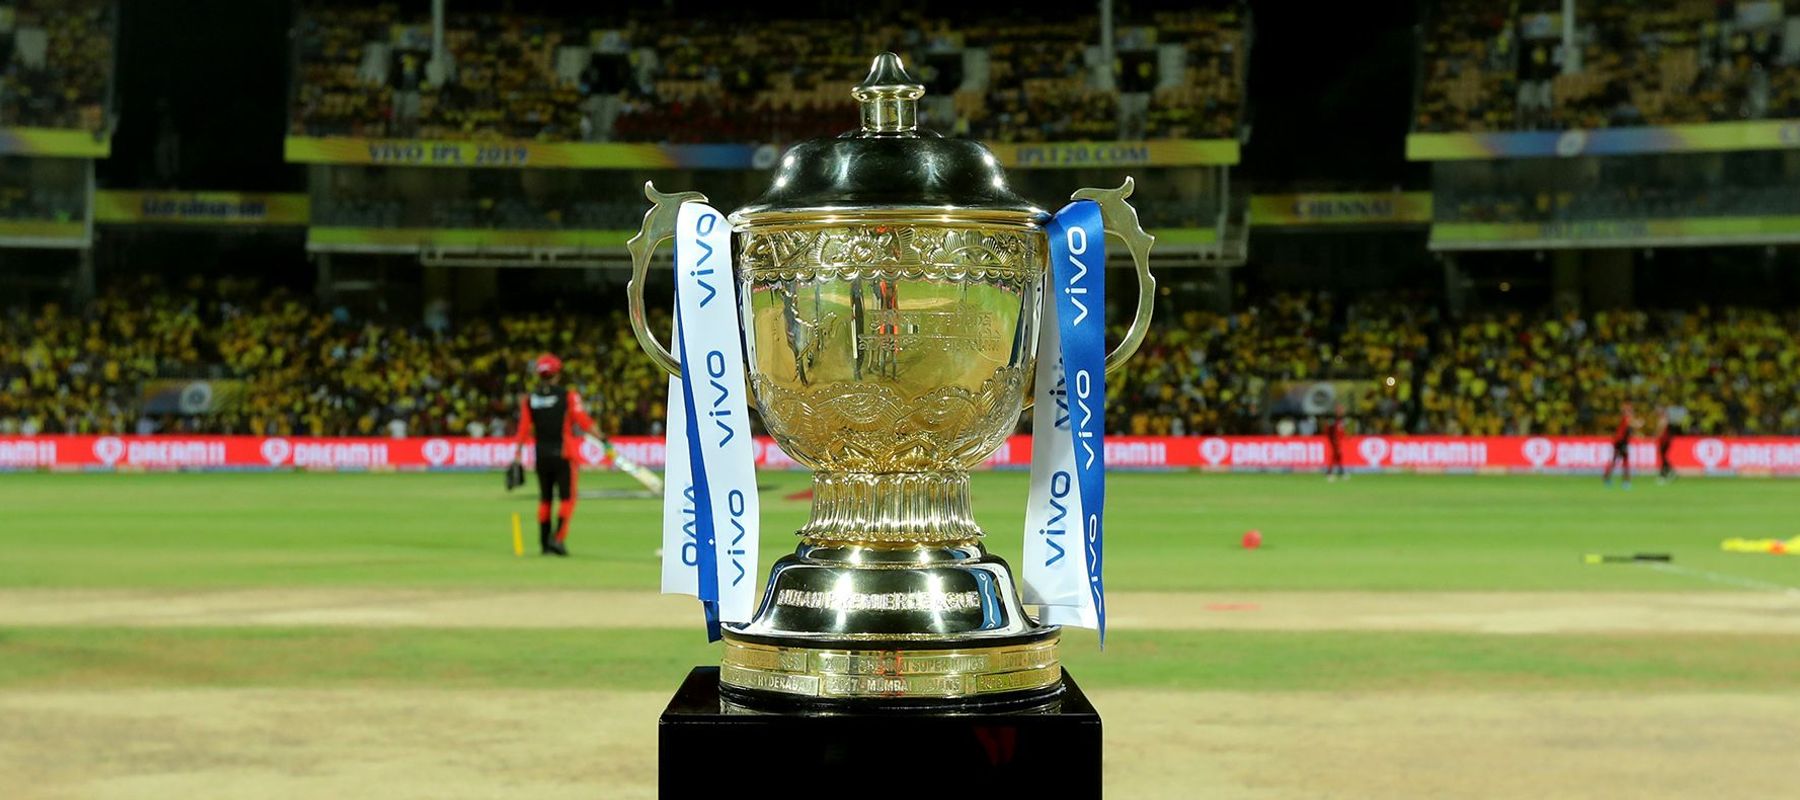 The IPL final, for the first time, may not be played on a Sunday